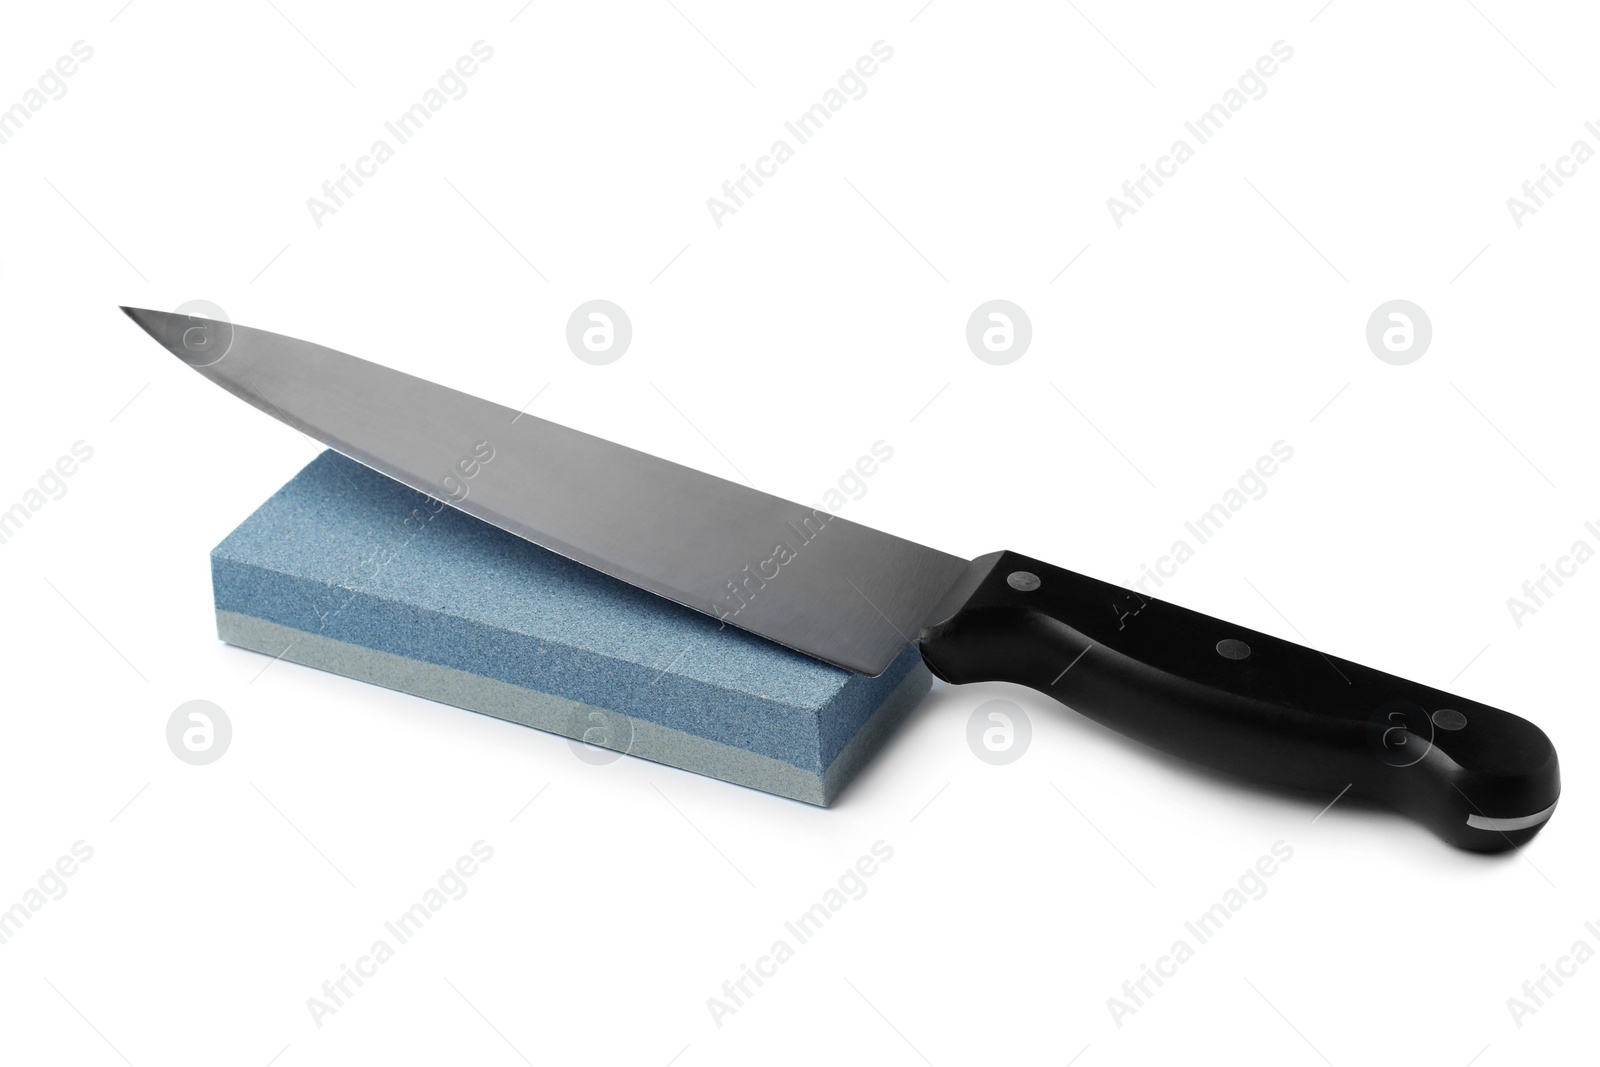 Photo of Sharp chief's knife and grindstone isolated on white